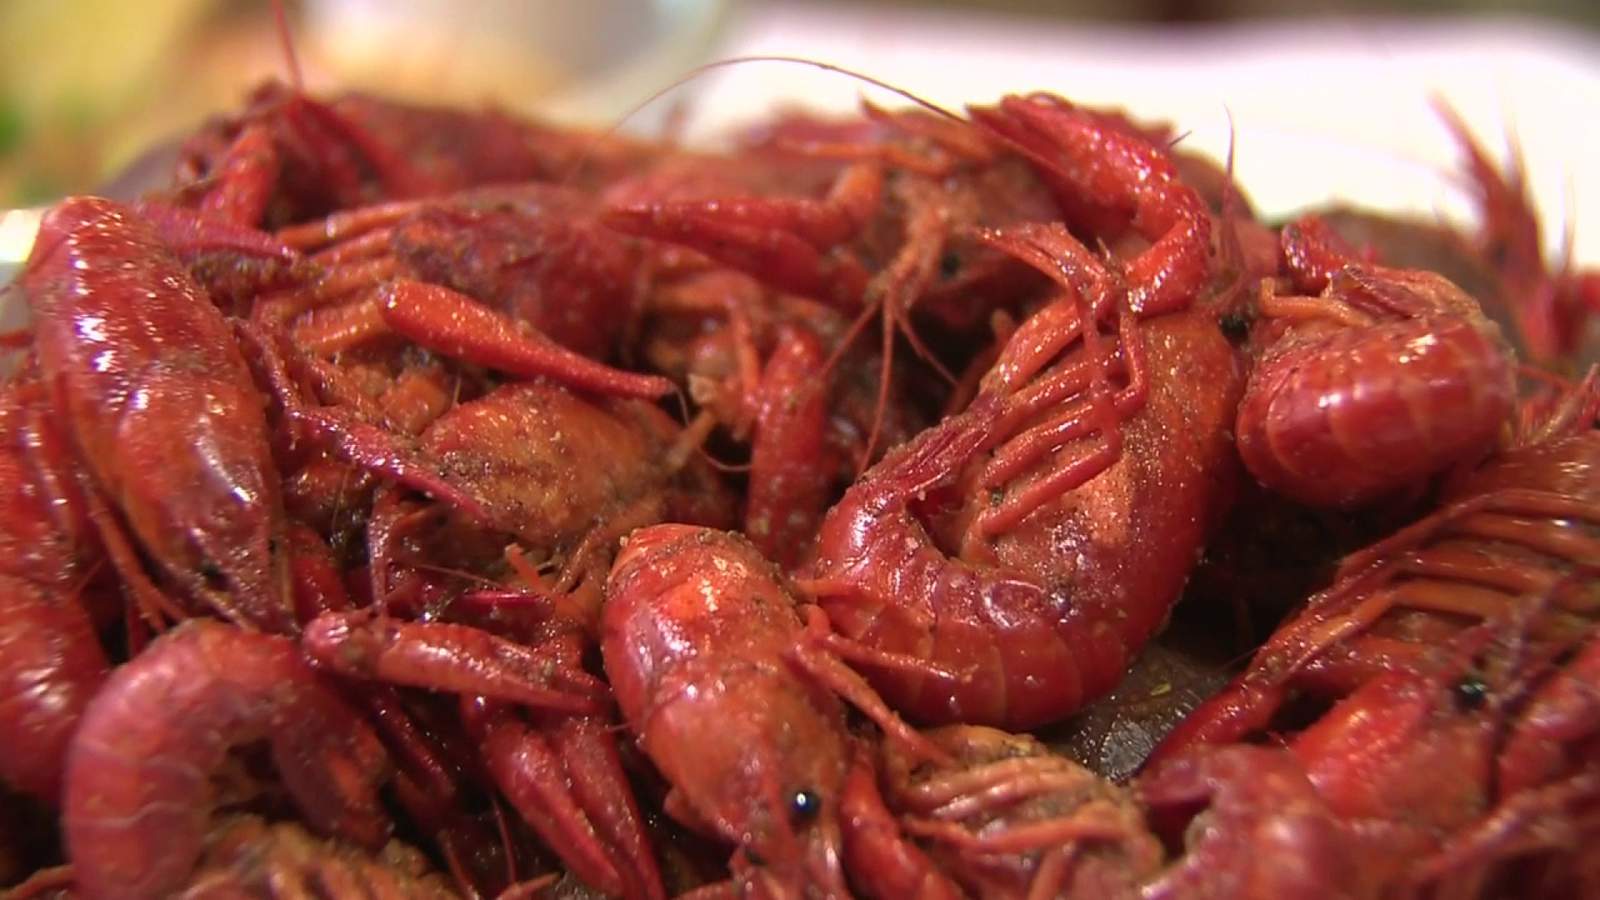 Crawfish or crab legs? Enjoy all-you-can-eat seafood with family and friends at Annual ‘Cajun AF’ Festival